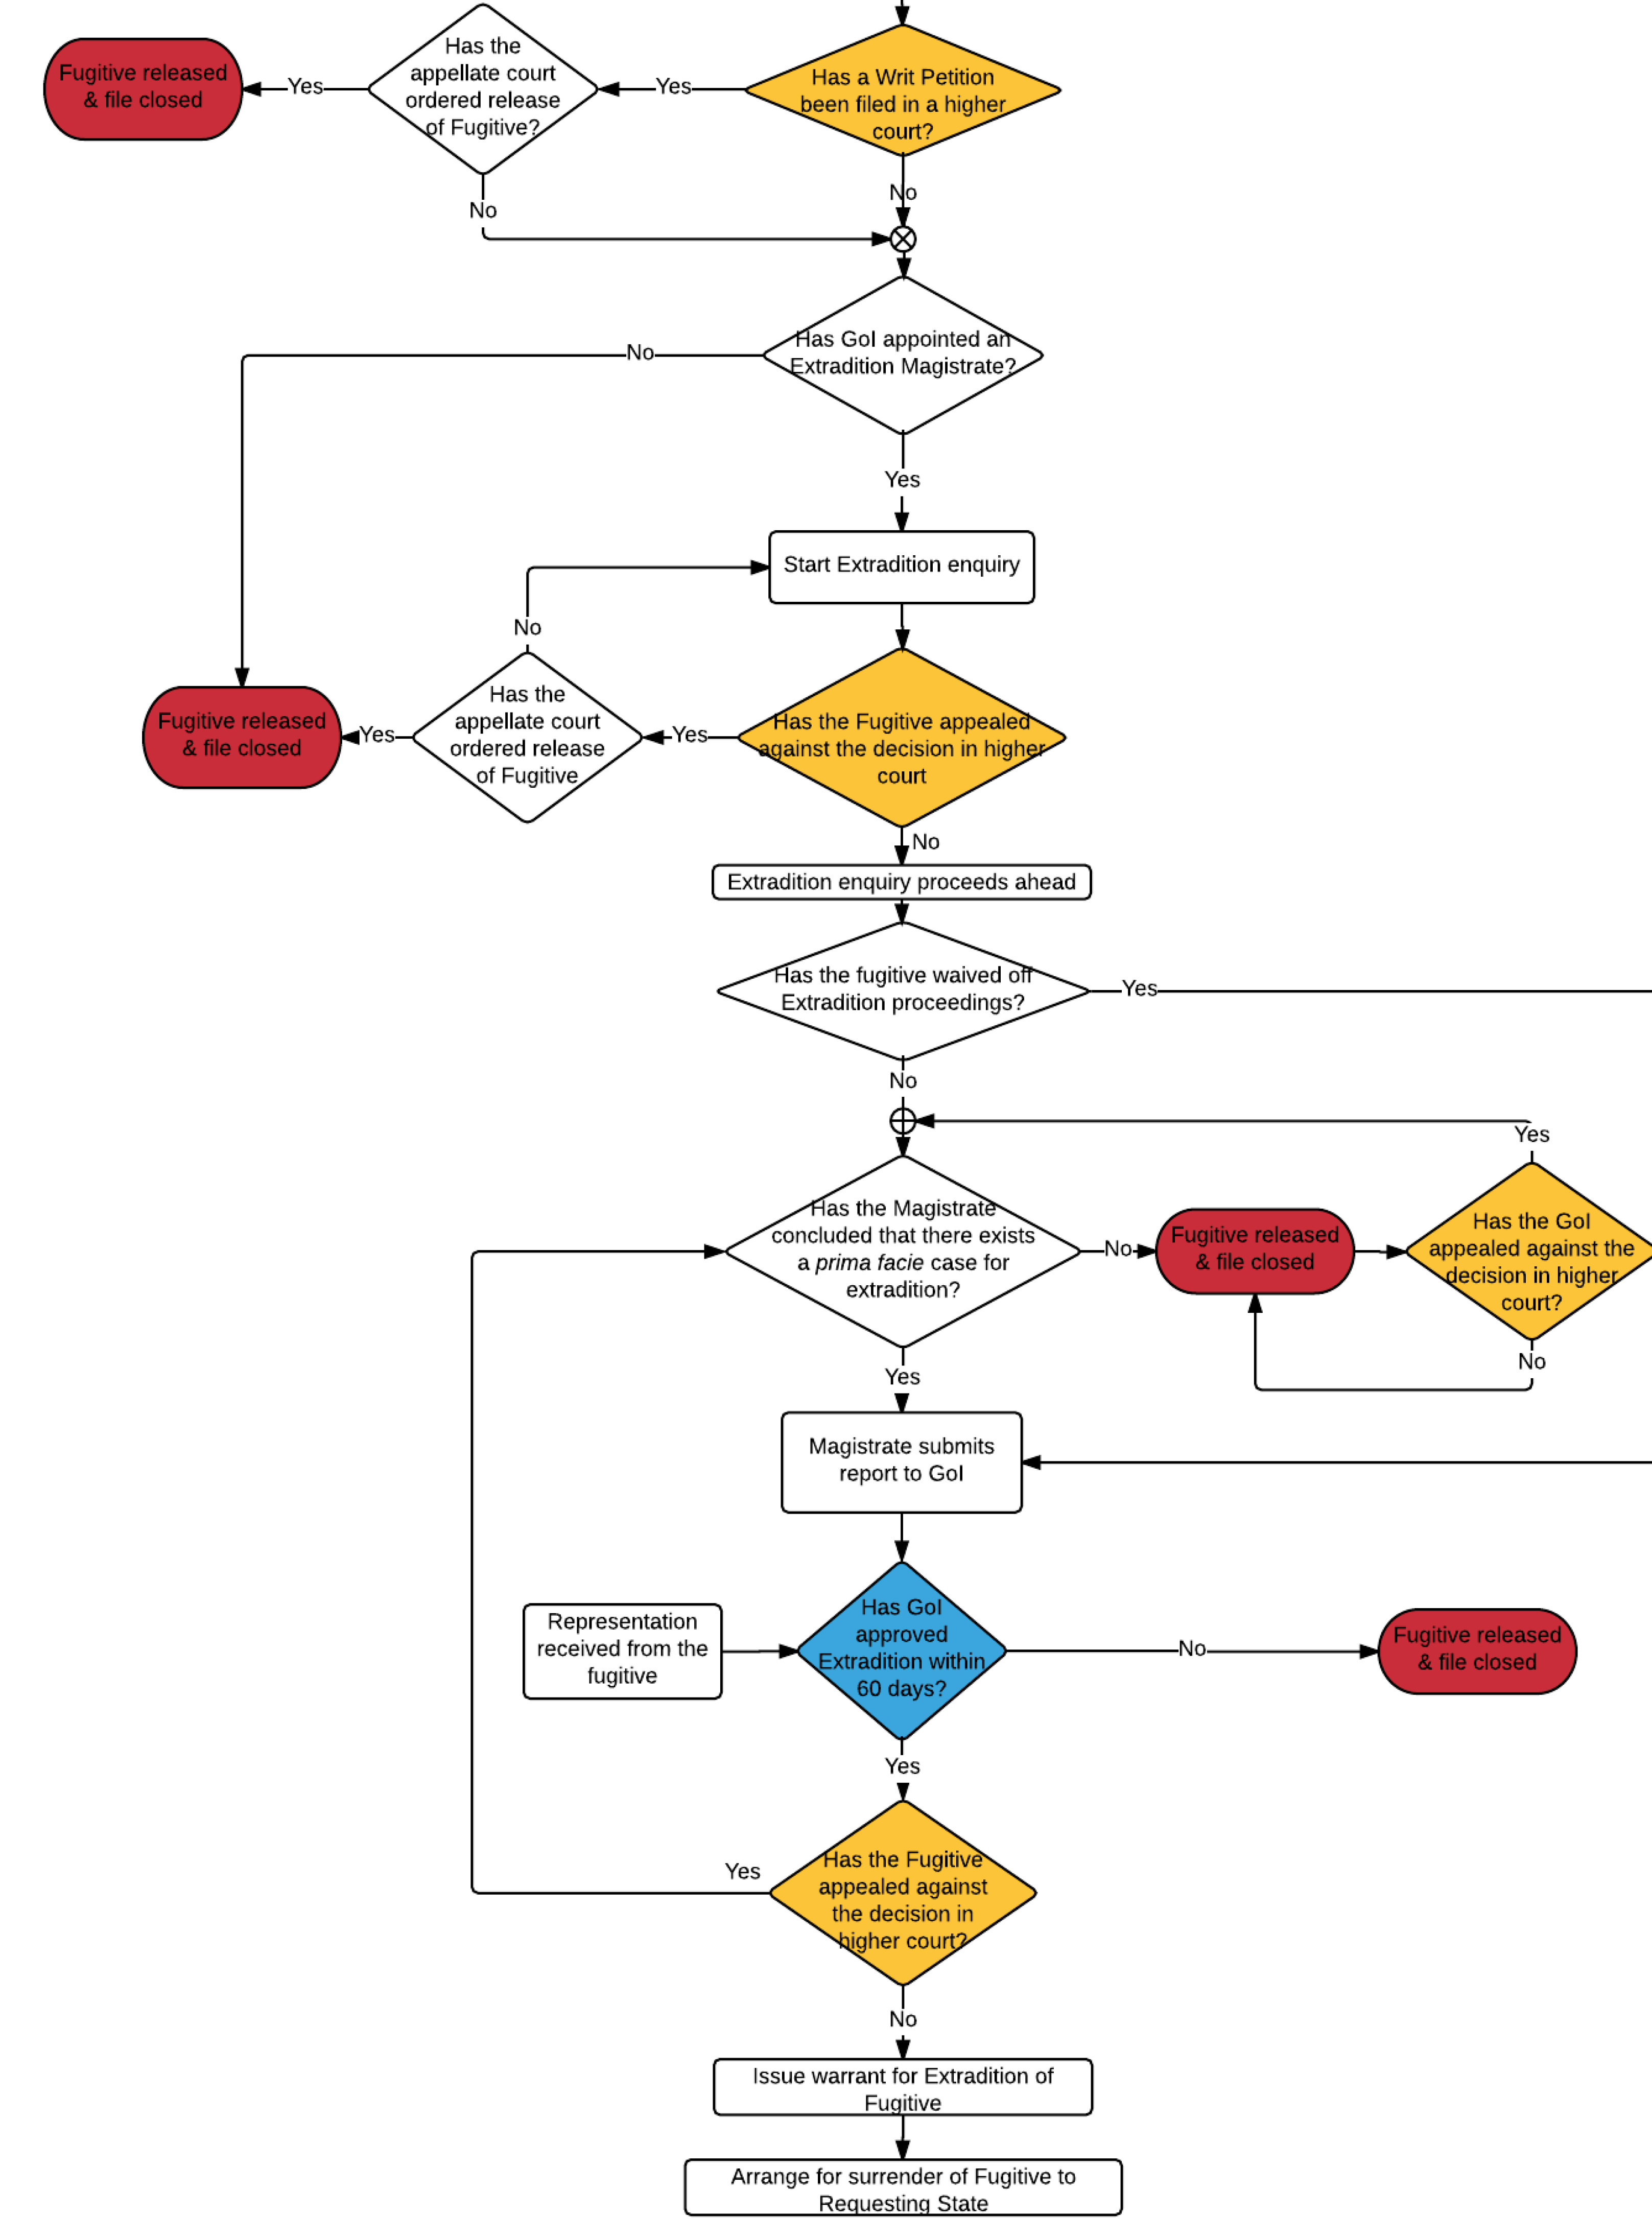 Process flow for outgoing extradition requests